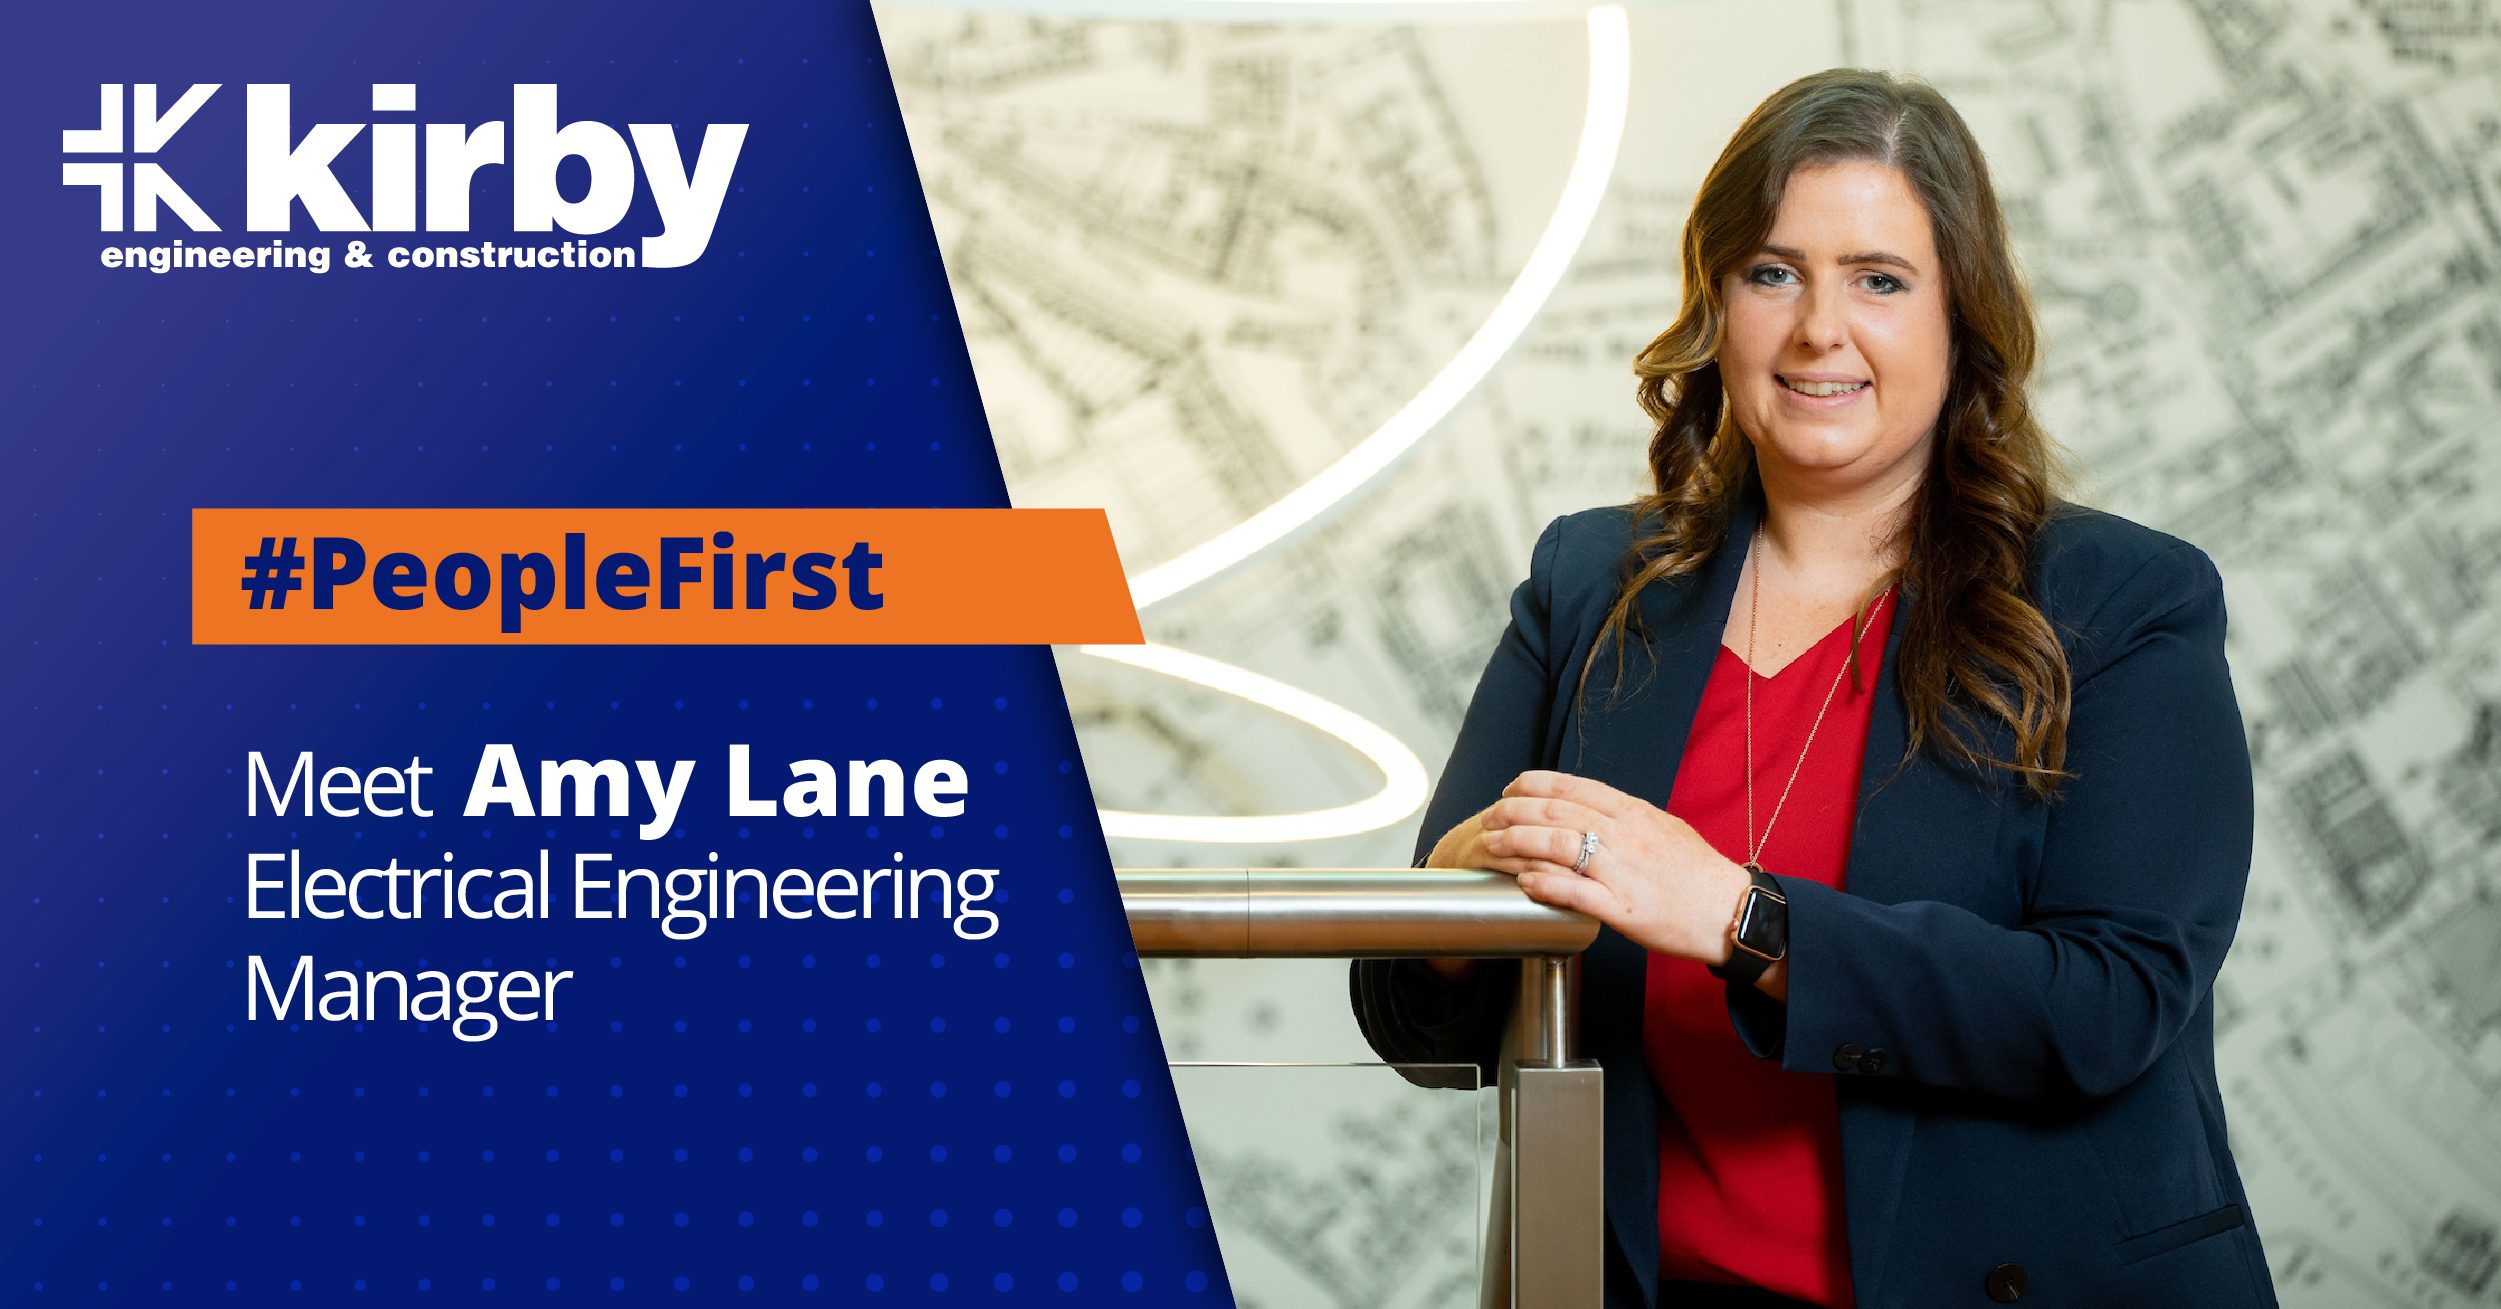 Amy Lane, Electrical Engineering Manager